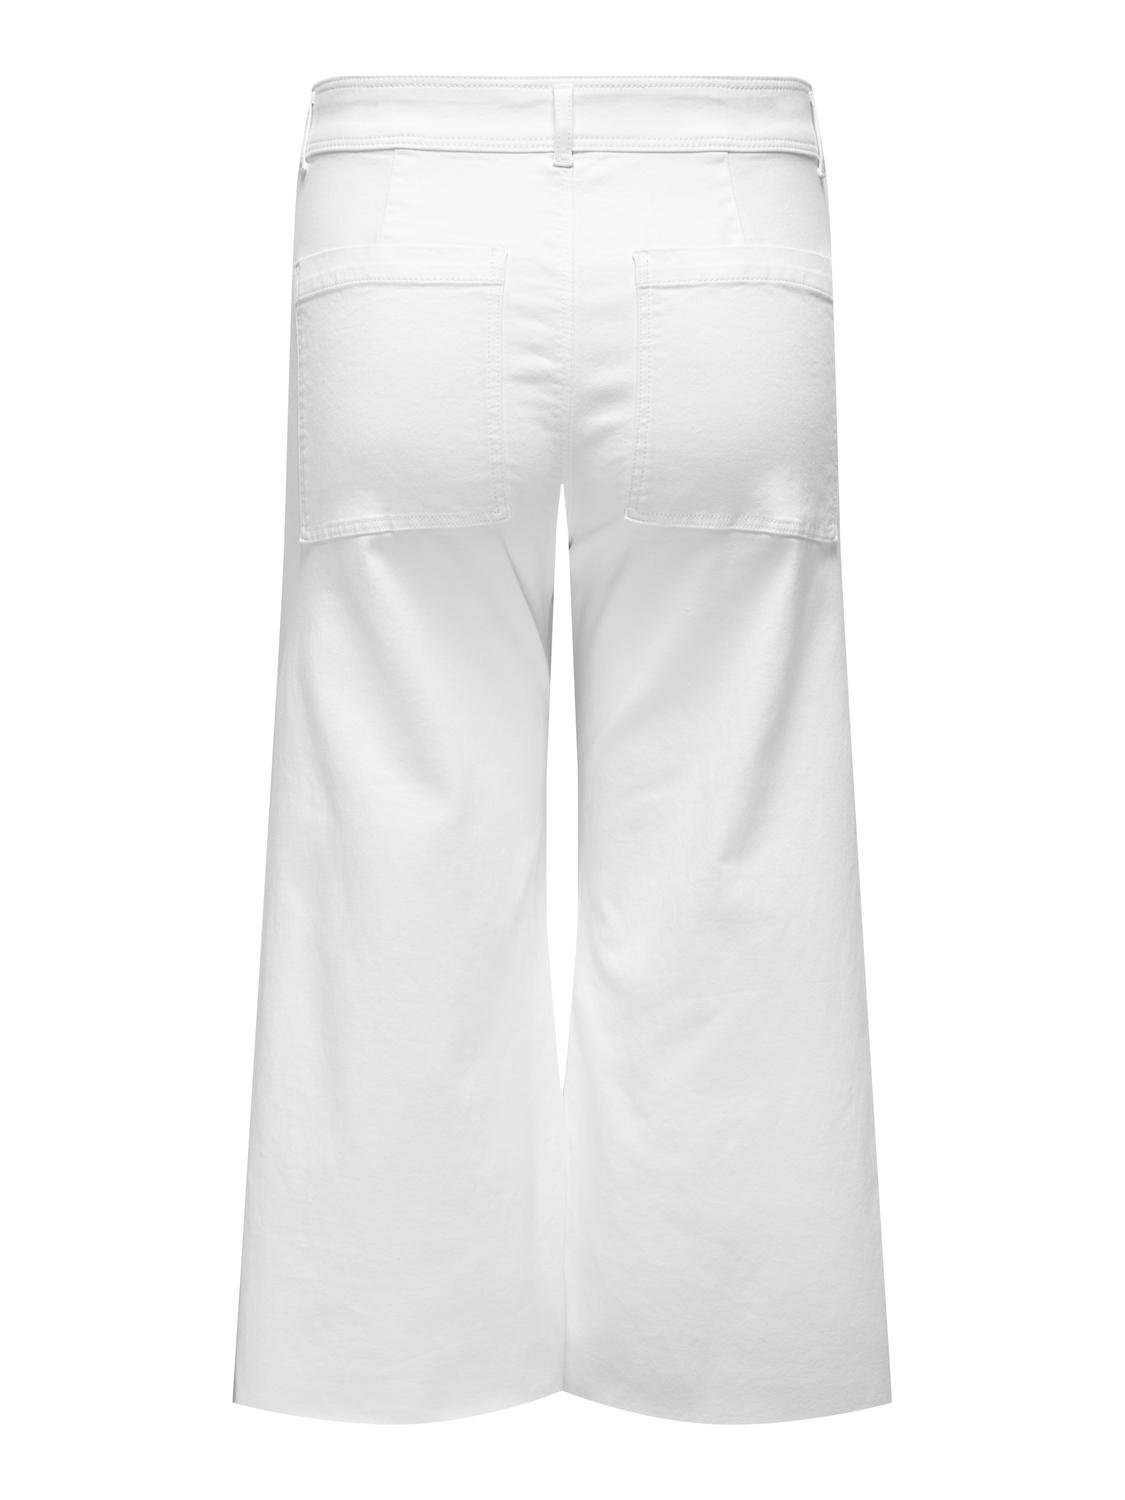 ONLY CARSylvie High Waist Wide Jeans -White - 15315717